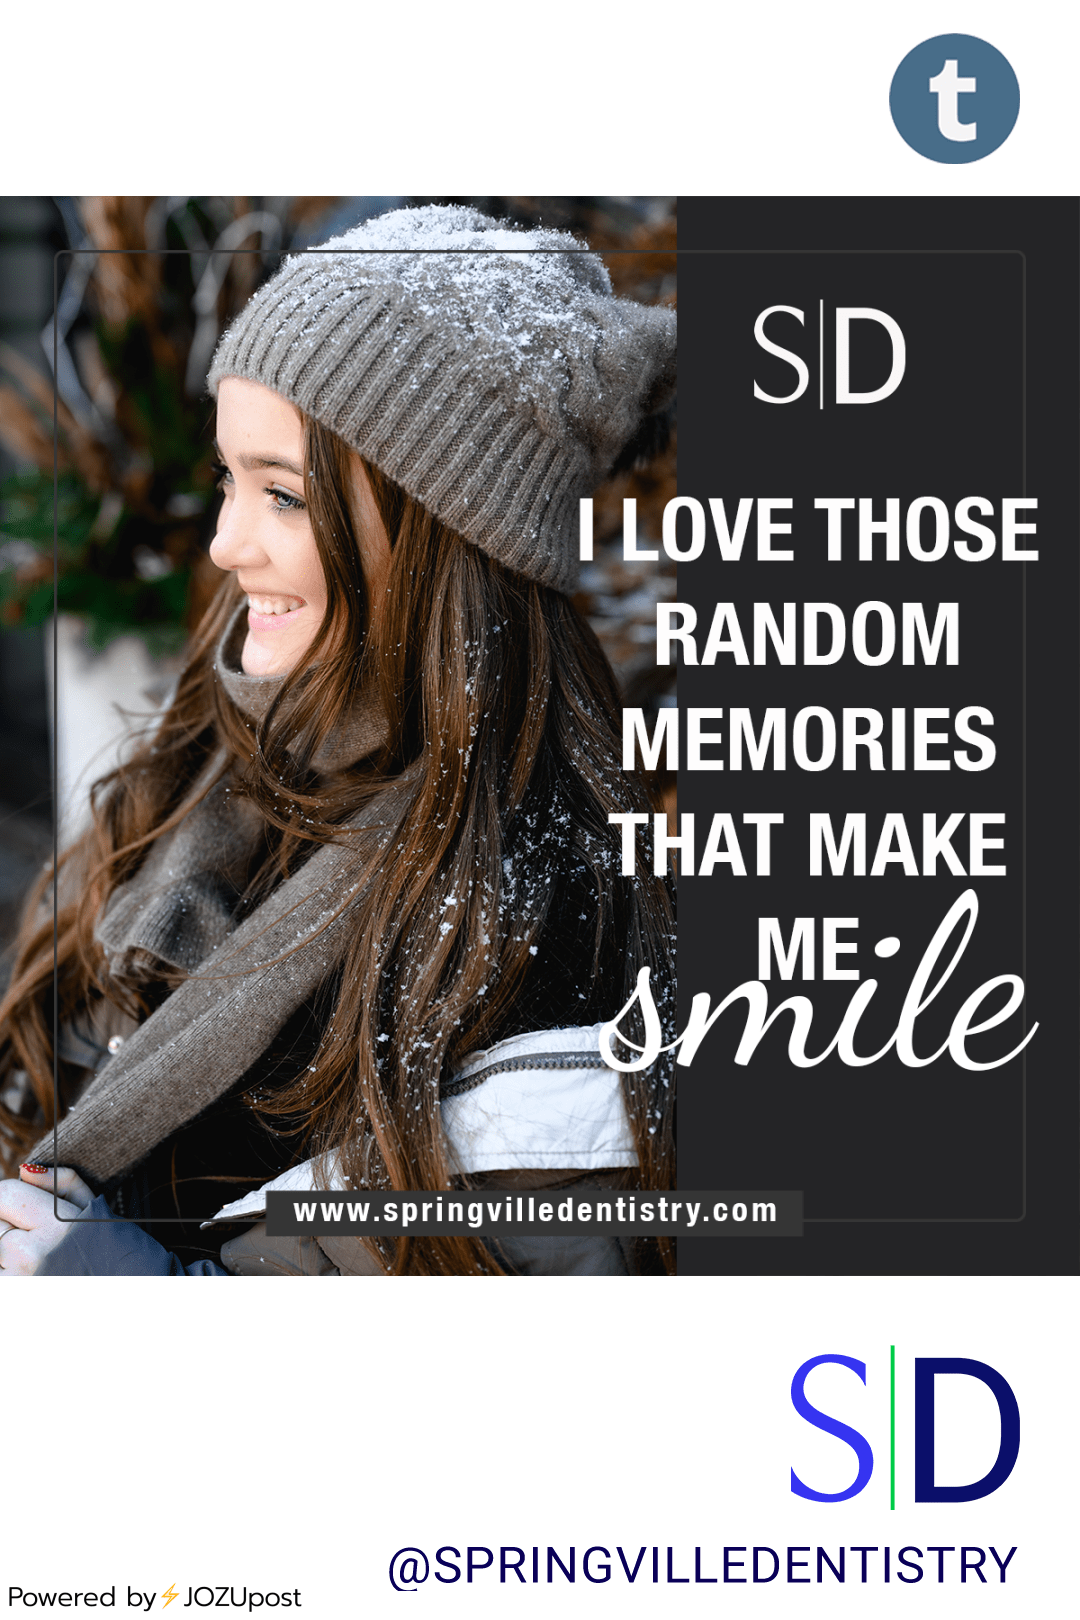 I love those random memories that make me smile.
Think About It:
What are some memories that bring a smile to your face? Who are you with? Why is it special? What reminds you of this particular memory?
#smile #whiteteeth